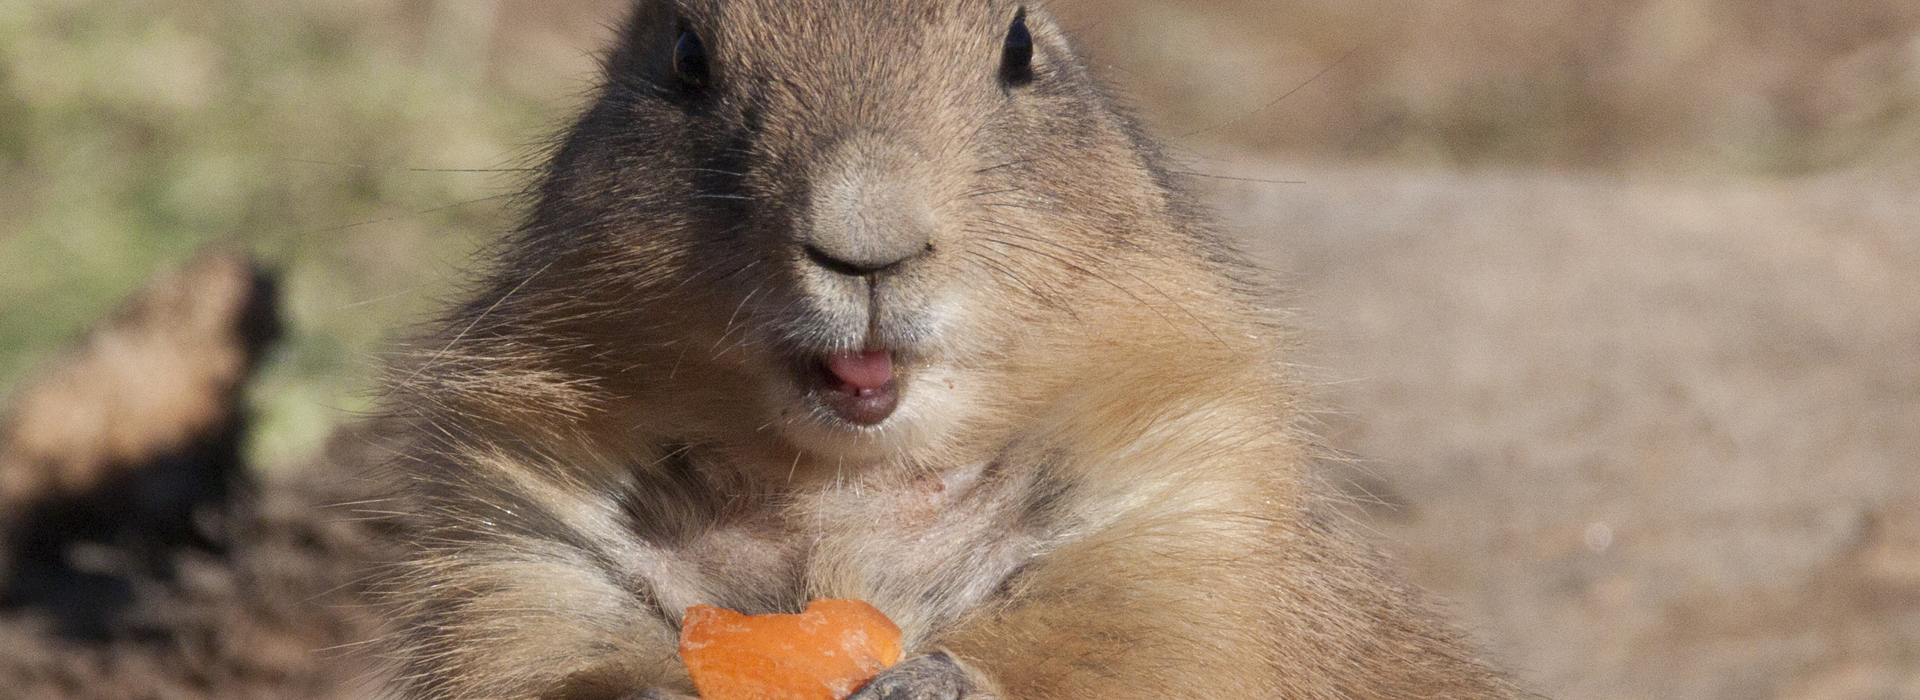 Prairie dog eating a piece of carrot